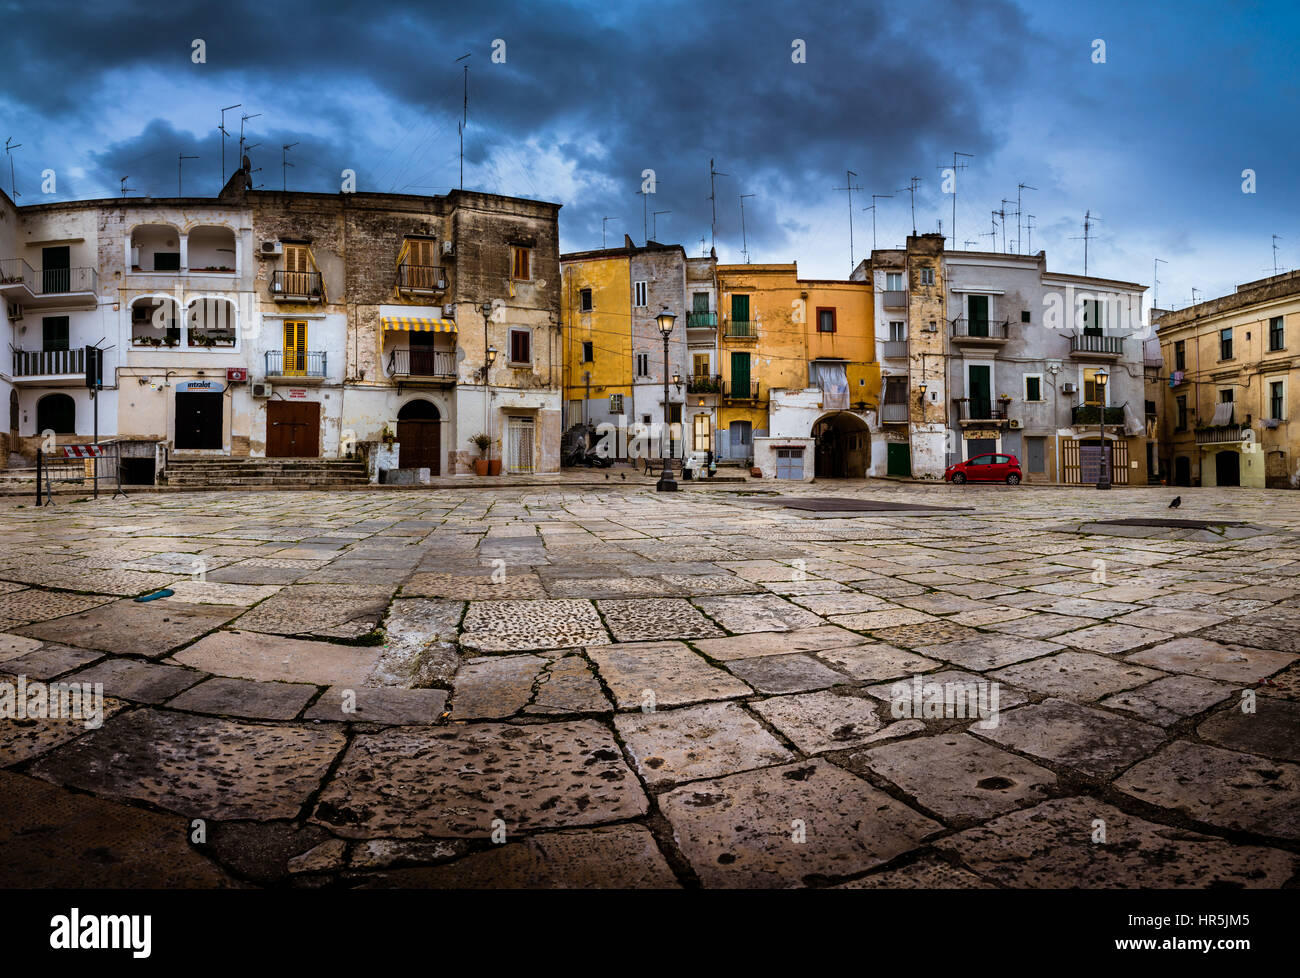 Stunning view Bari Old Town in South Italy Region Puglia Stock Photo